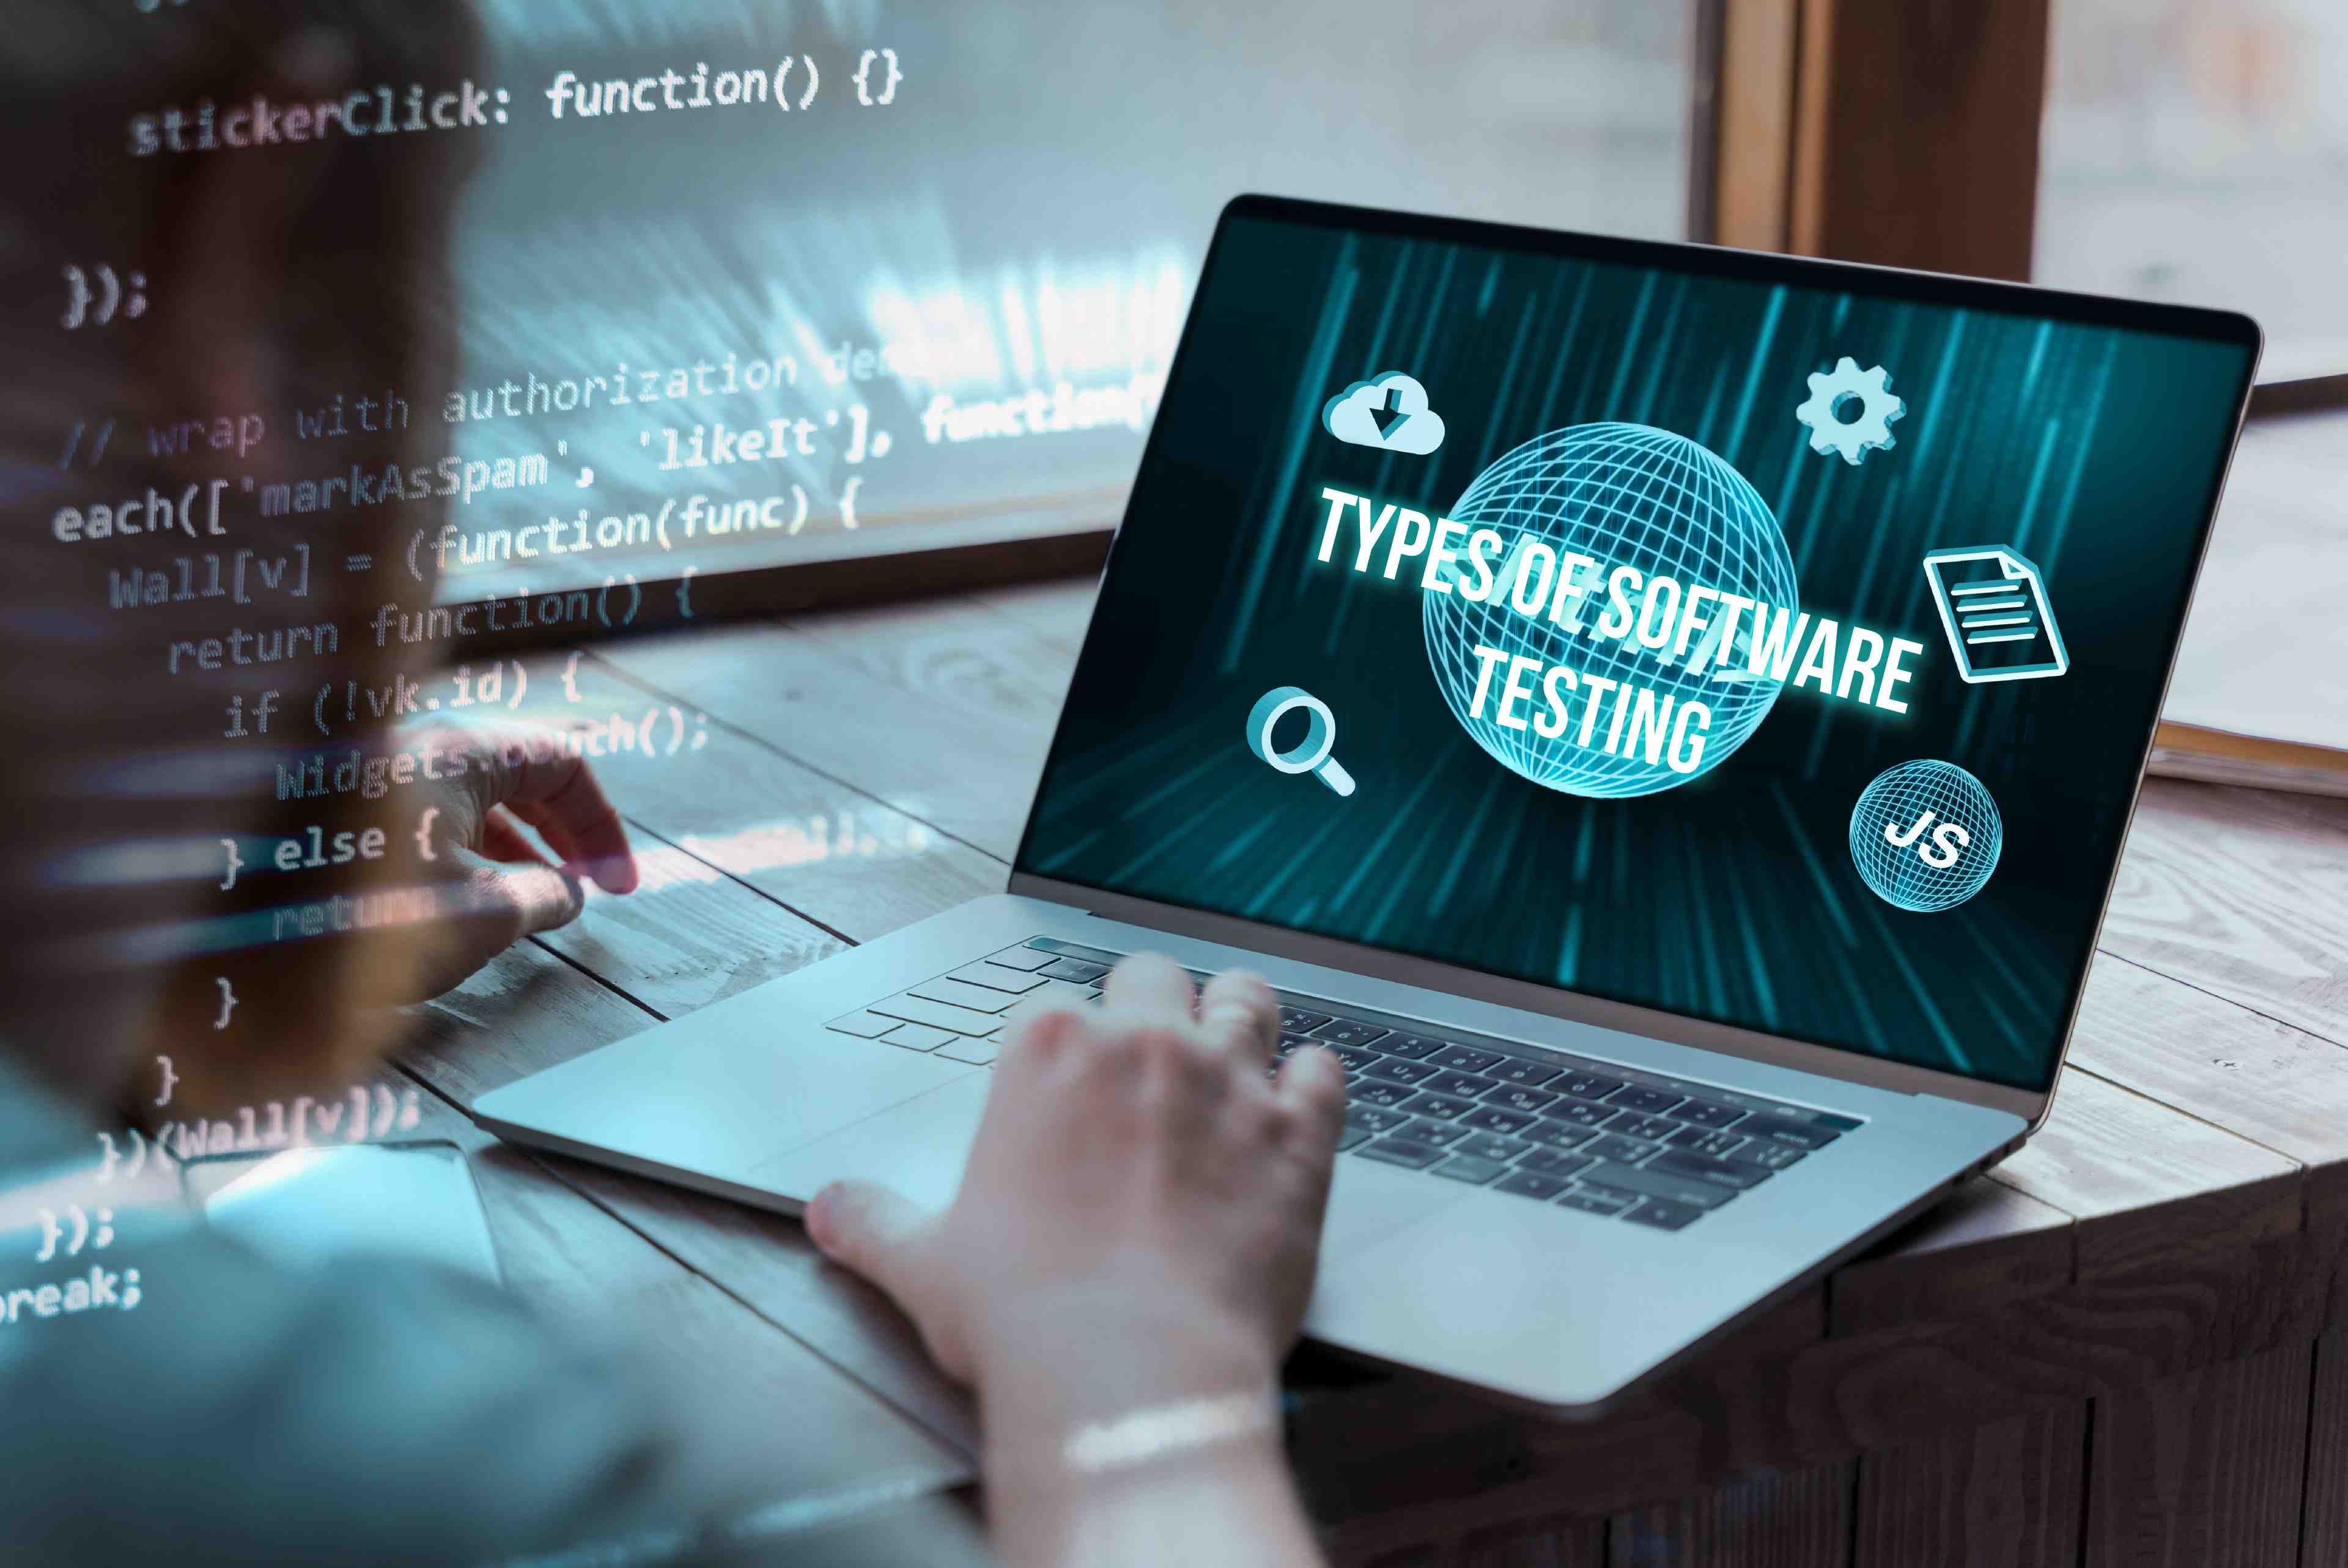 Discover the Ultimate Guide to Over 100 Types of Software Testing